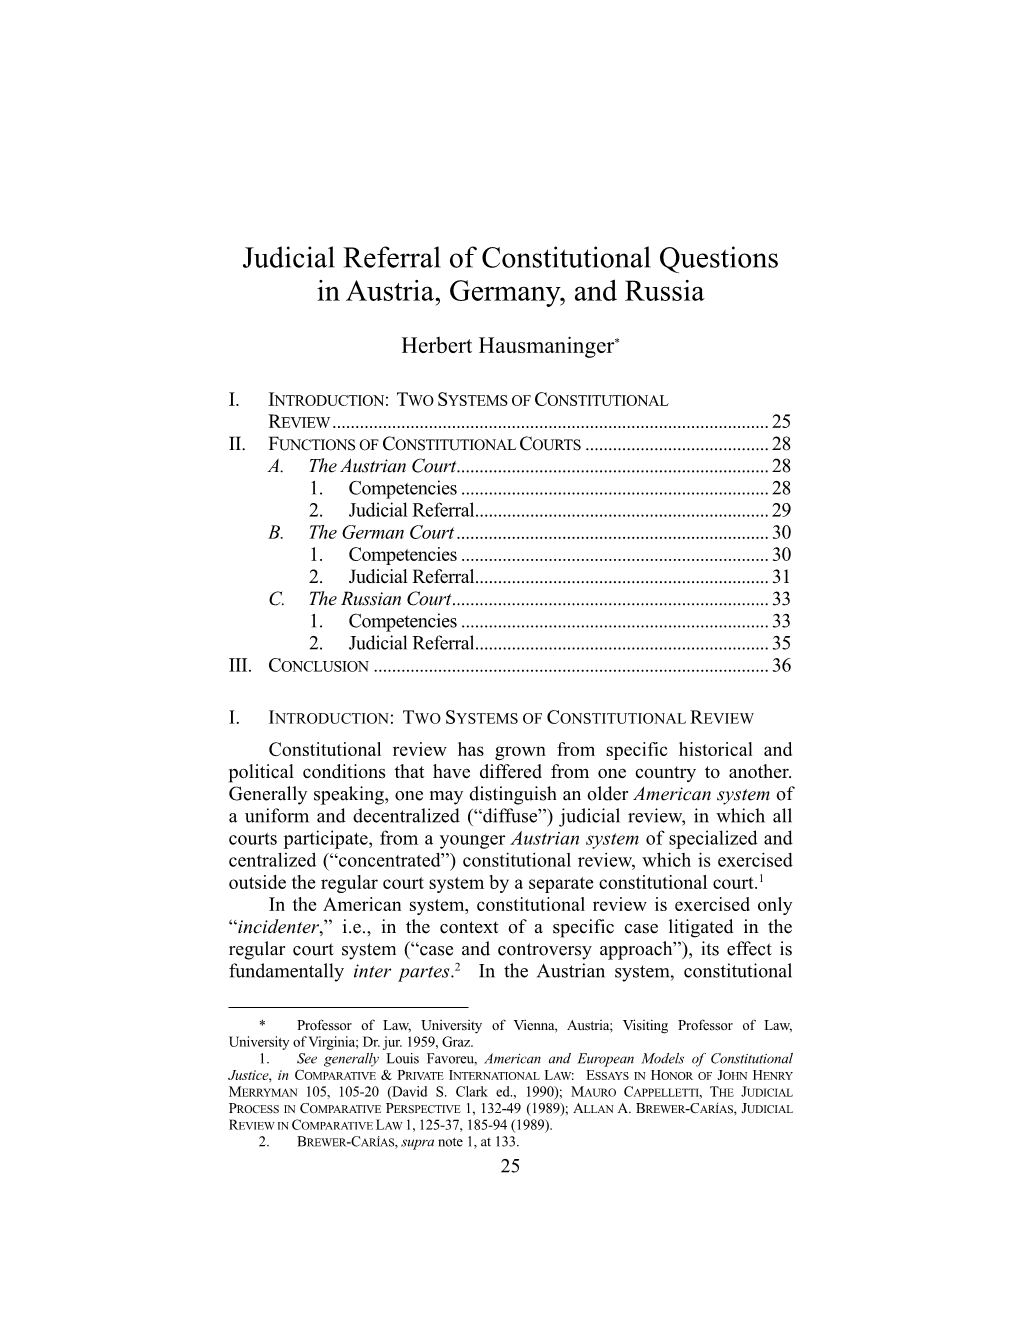 Judicial Referral of Constitutional Questions in Austria, Germany, and Russia